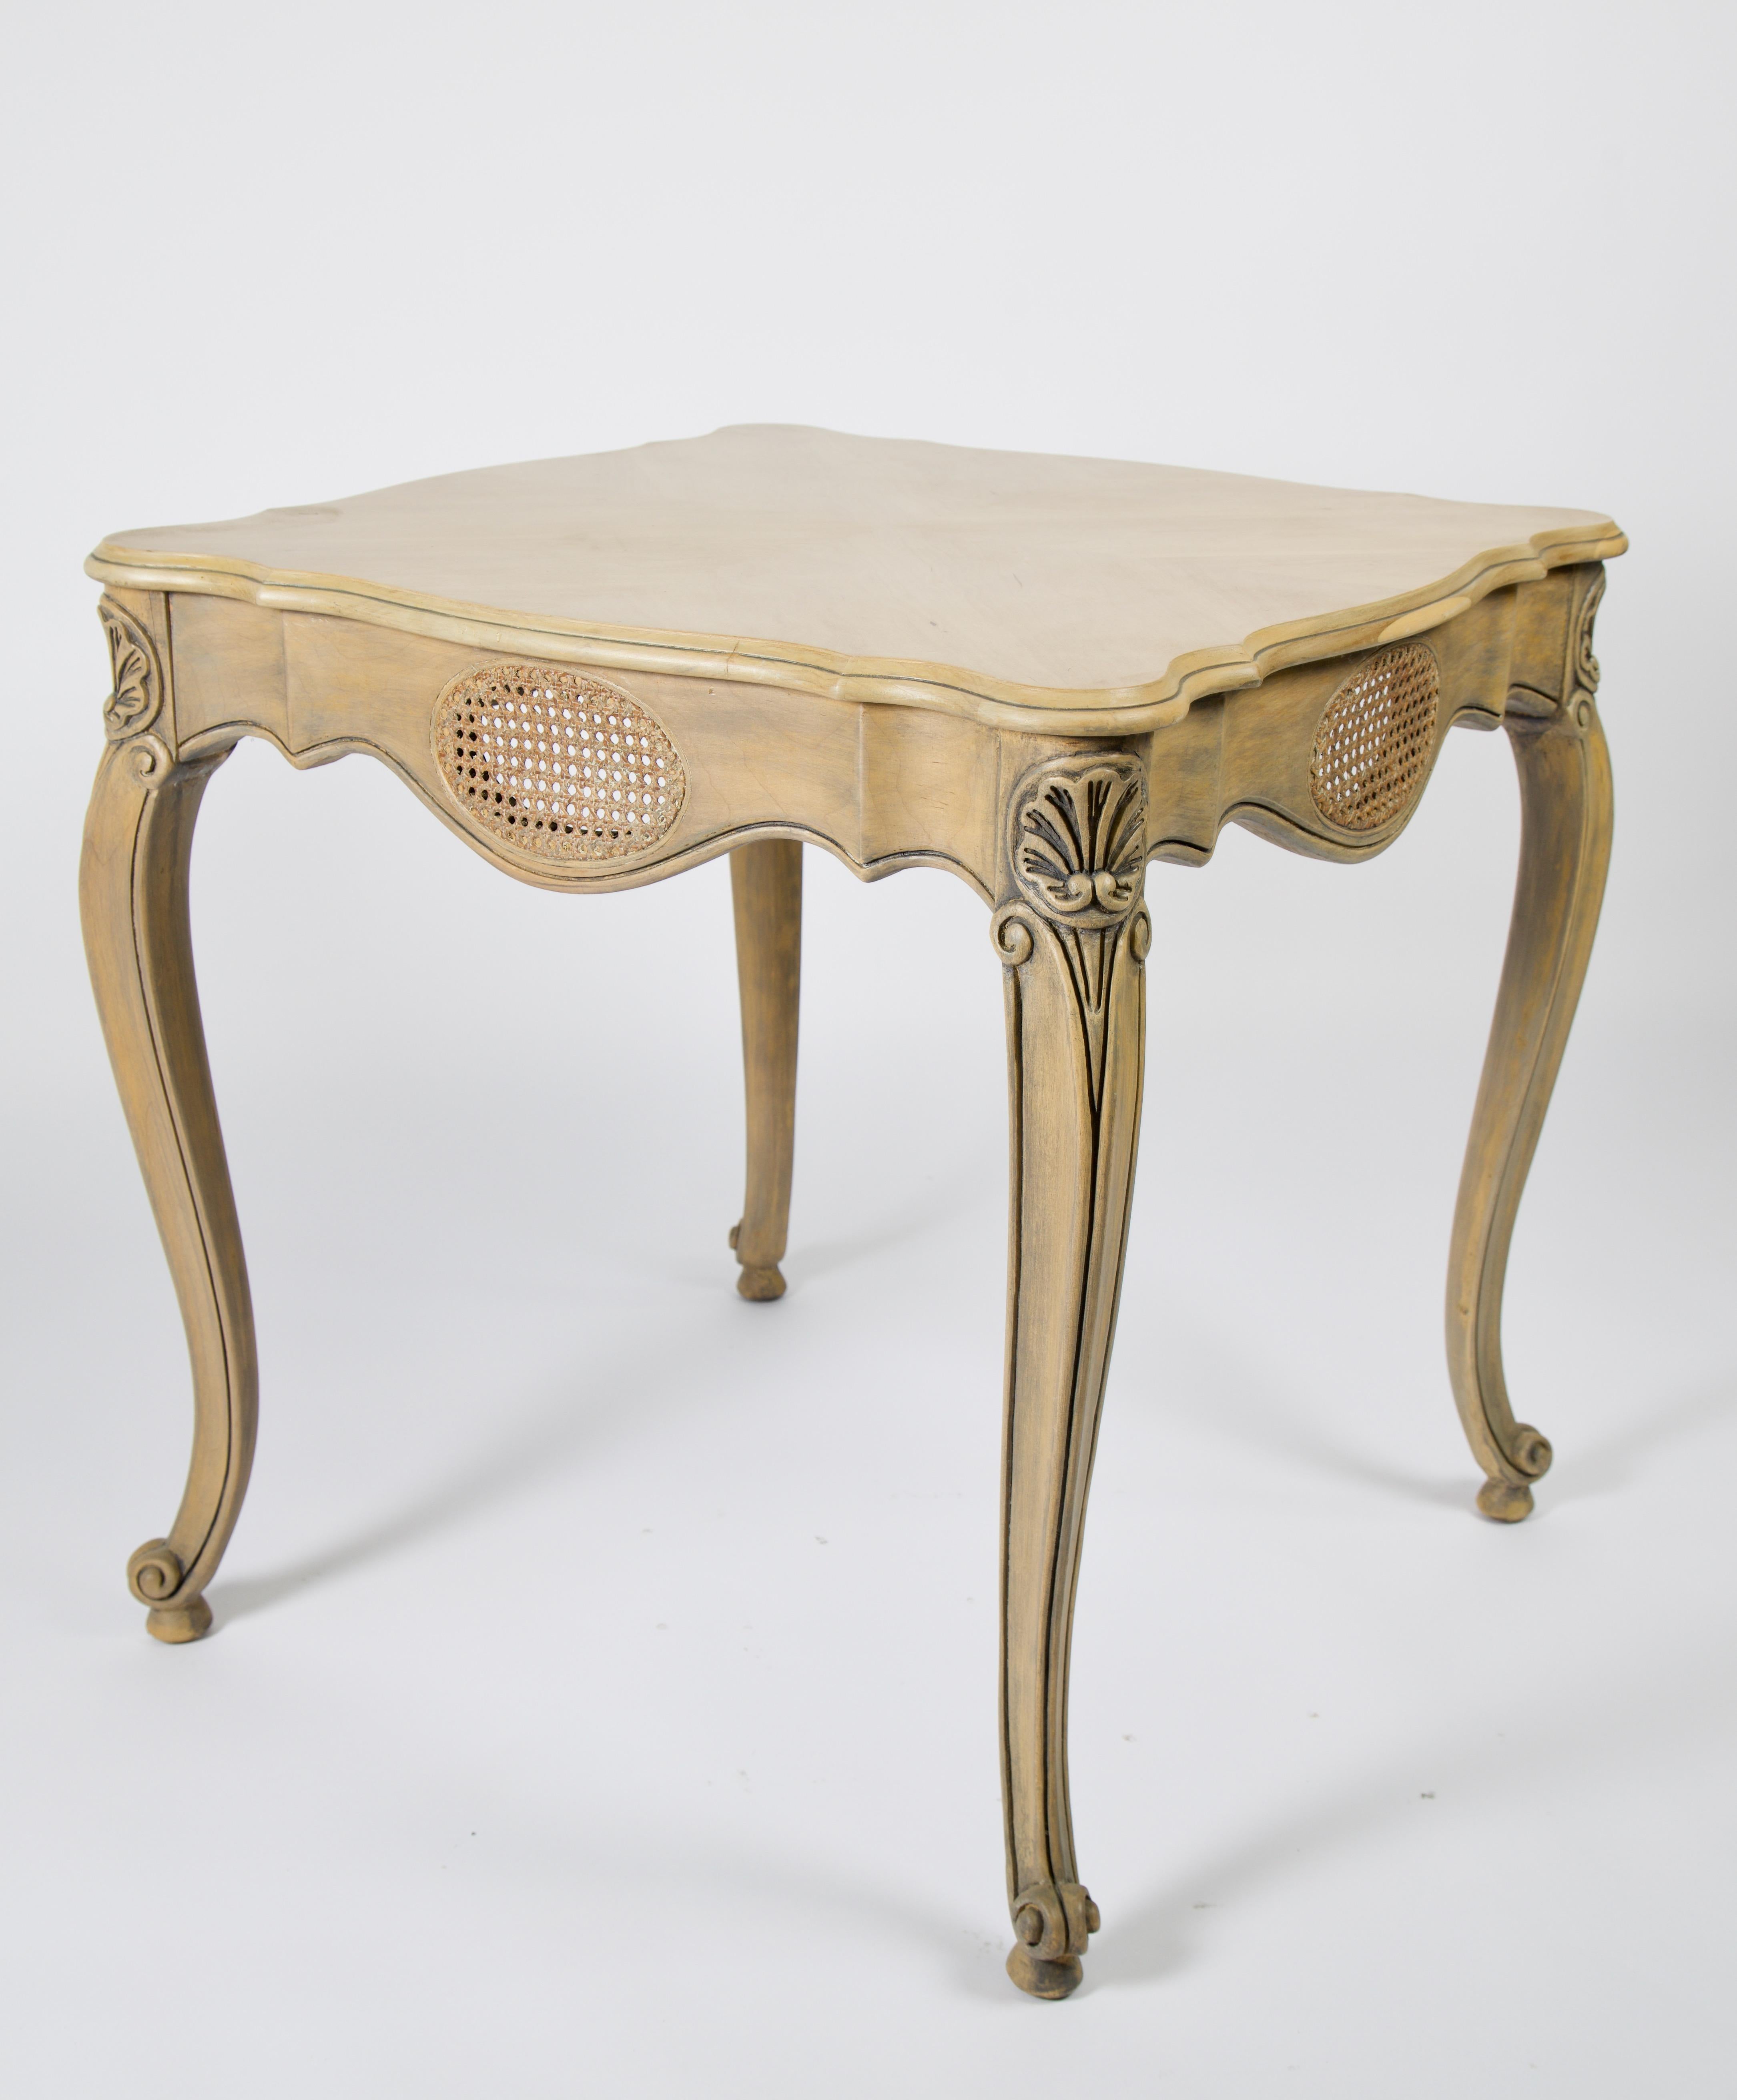 A set of French Provincial side tables. These have been stripped of the original finish and bleached with details enhanced in black. Beautiful book match veneer top and solid hardwood construction with elegant cabriole legs. The bleached wood